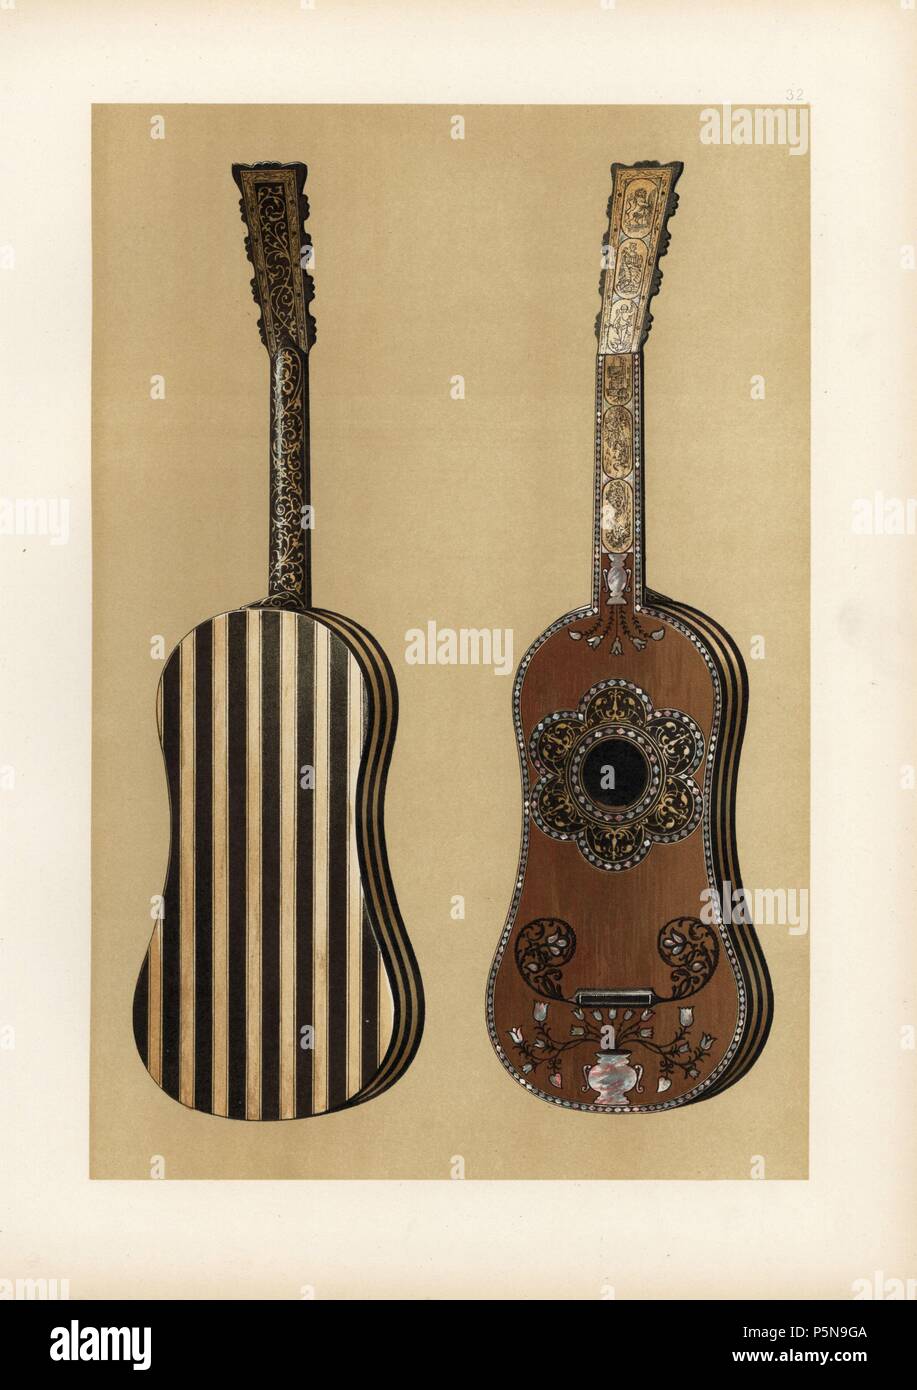 Guitar with inlaid ivory plaques, engraved fingerboard, mother-of-pearl vase beneath the bridge, and back of ebony and ivory. Chromolithograph from an illustration by William Gibb from A.J. Hipkins' 'Musical Instruments, Historic, Rare and Unique,' Adam and Charles Black, Edinburgh, 1888. Alfred James Hipkins (1826-1903) was an English musicologist who specialized in the history of the pianoforte and other instruments. William Gibb was a master illustrator and chromolithographer and illustrated 'The Royal House of Stuart' (1890), 'Naval and Military Trophies' (1896), and others. Stock Photo